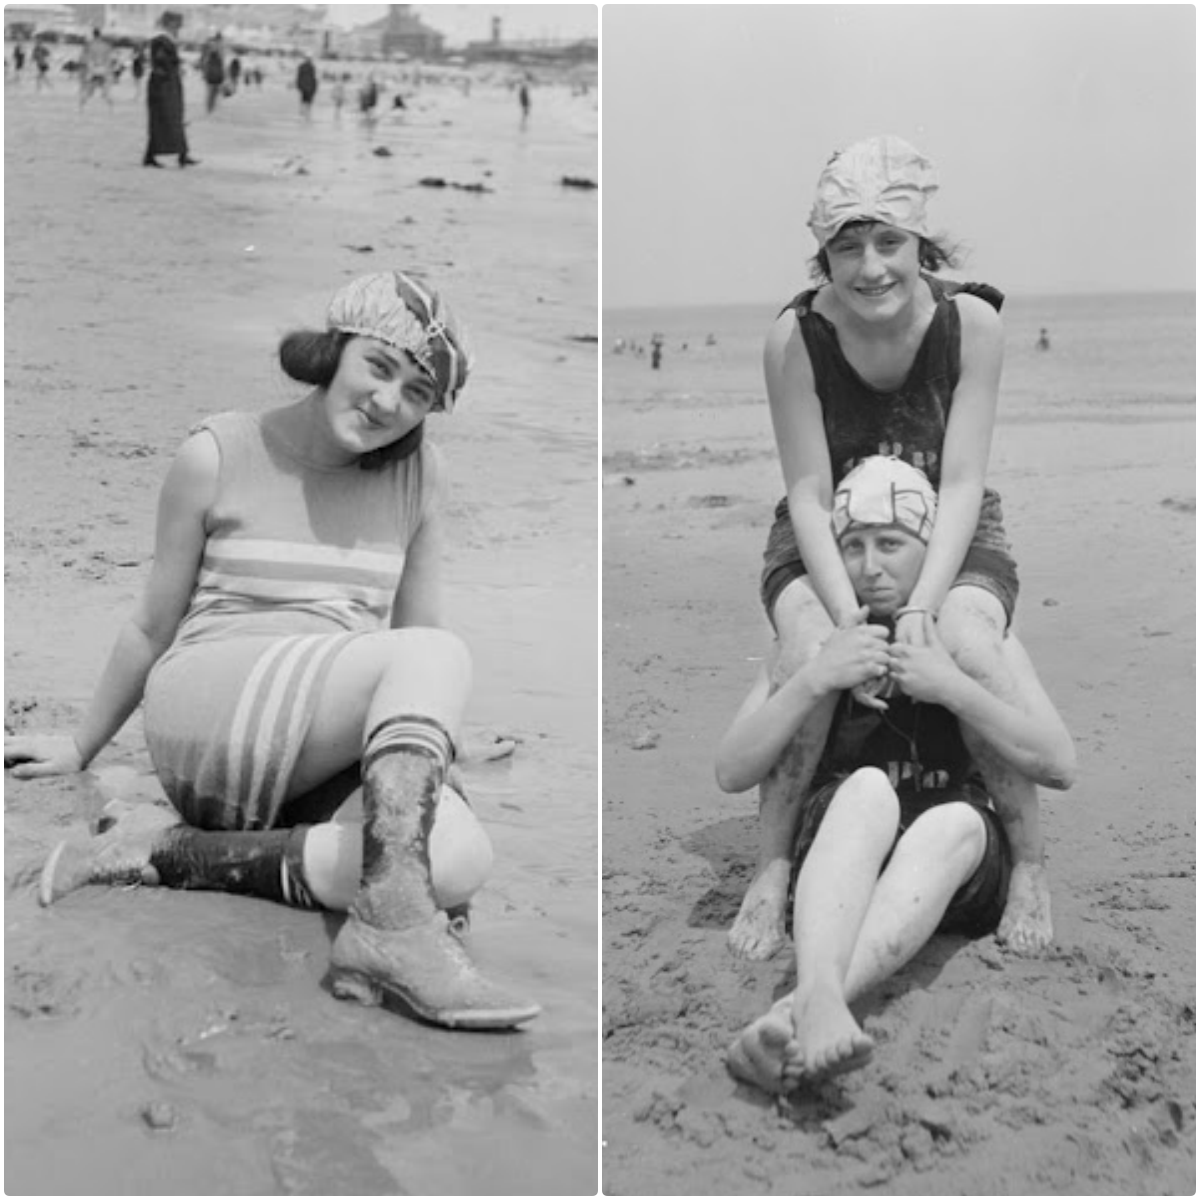 Fascinating Vintage Photographs Reveal What Women Wore At The Beach 100